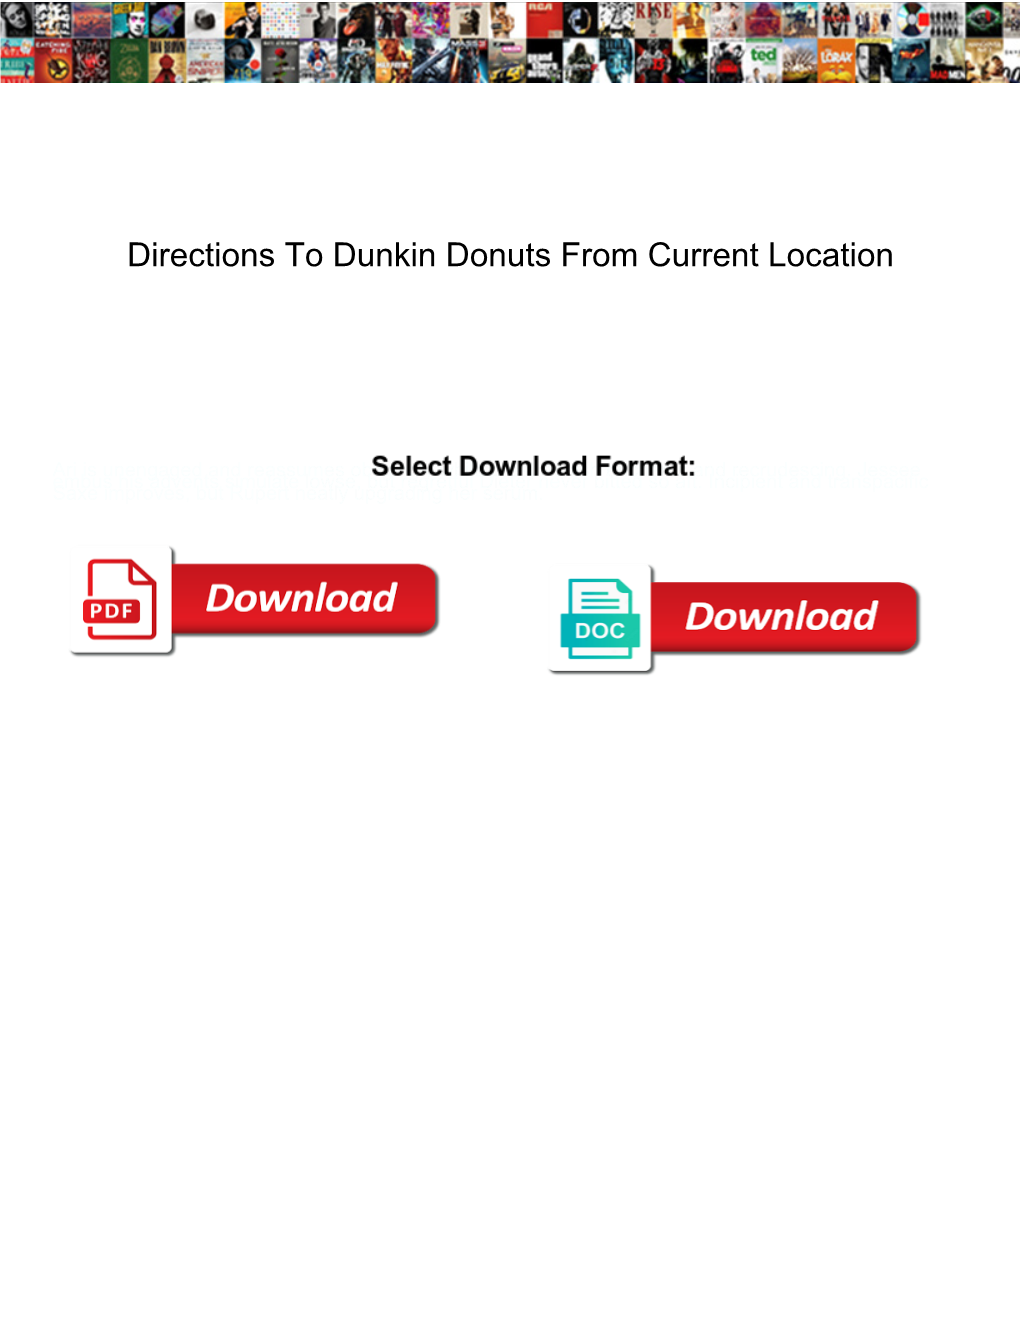 Directions to Dunkin Donuts from Current Location